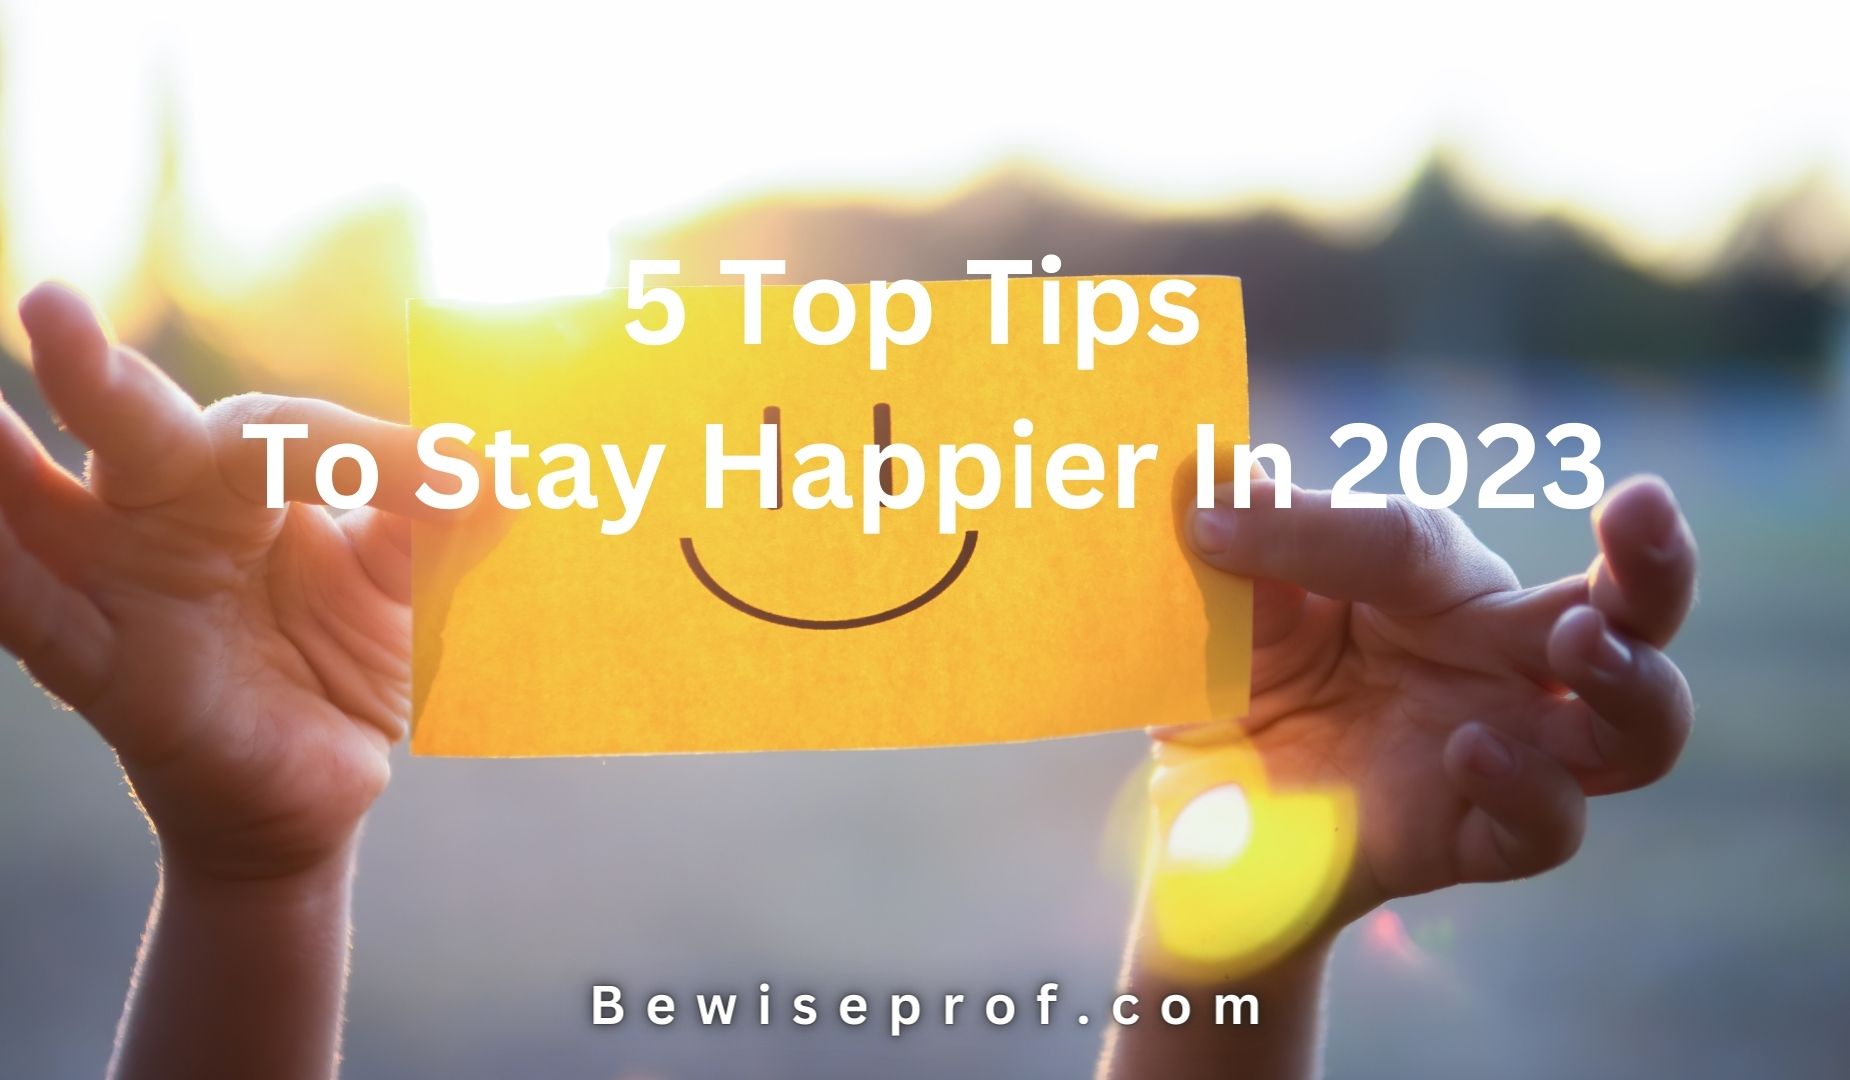 5 Top Tips To Stay Happier In 2023